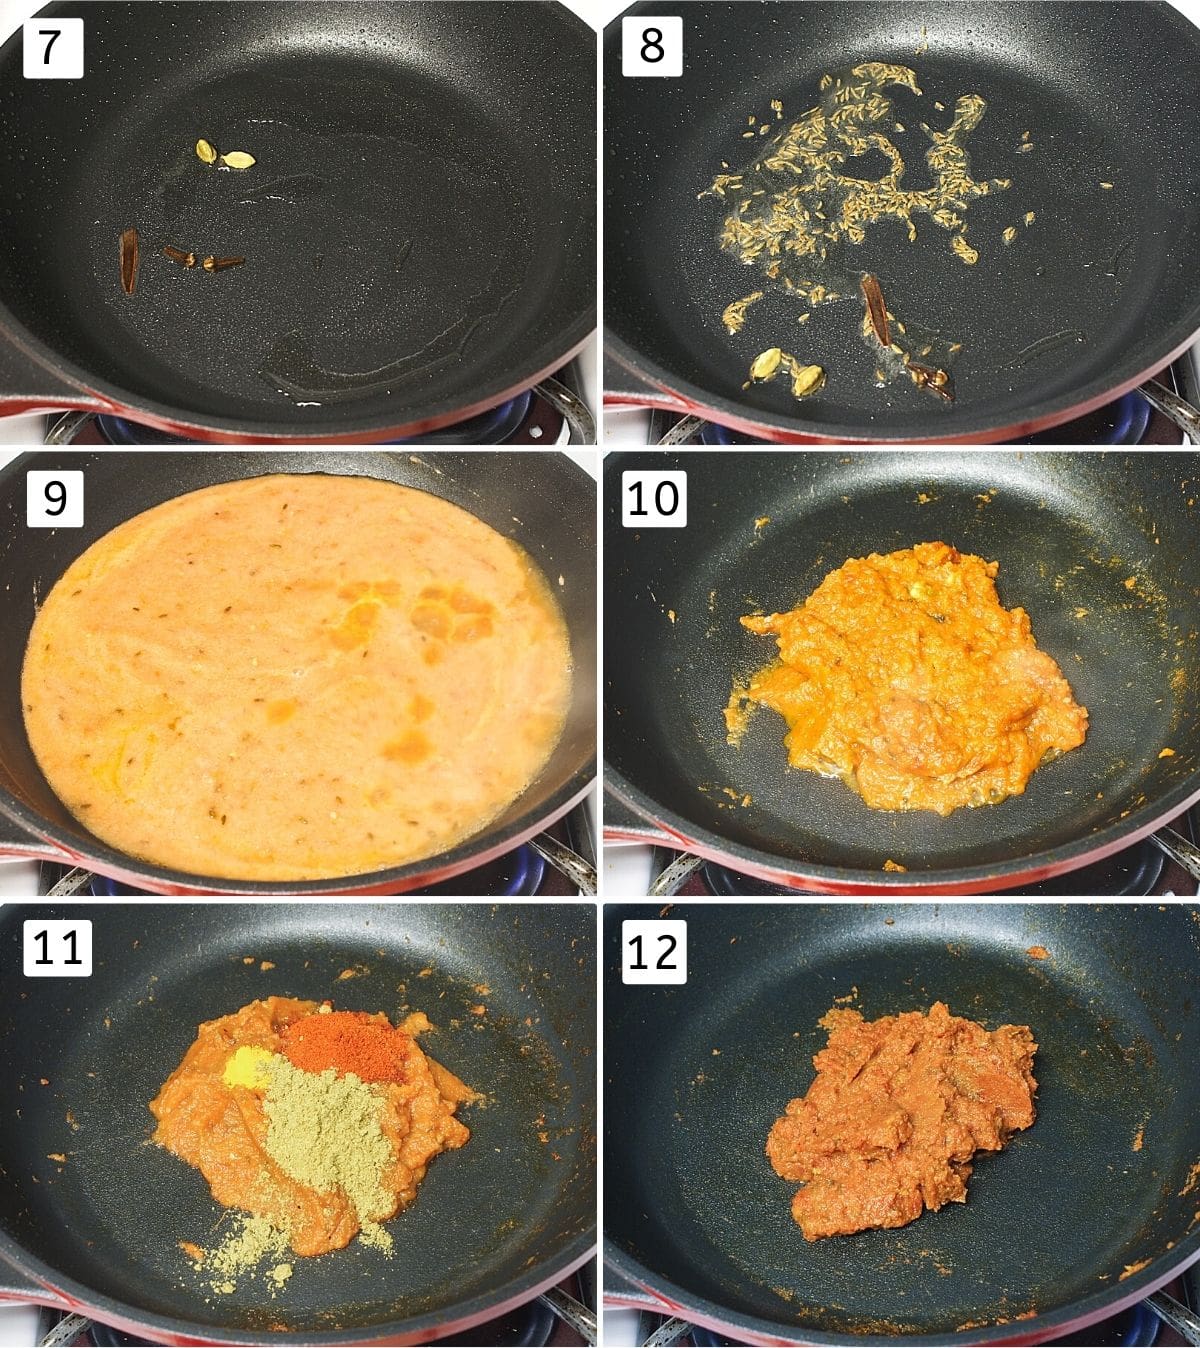 Collage of 6 steps showing whole spices in oil, adding cumin seeds, adding paste, cooked, adding spices, mixed.